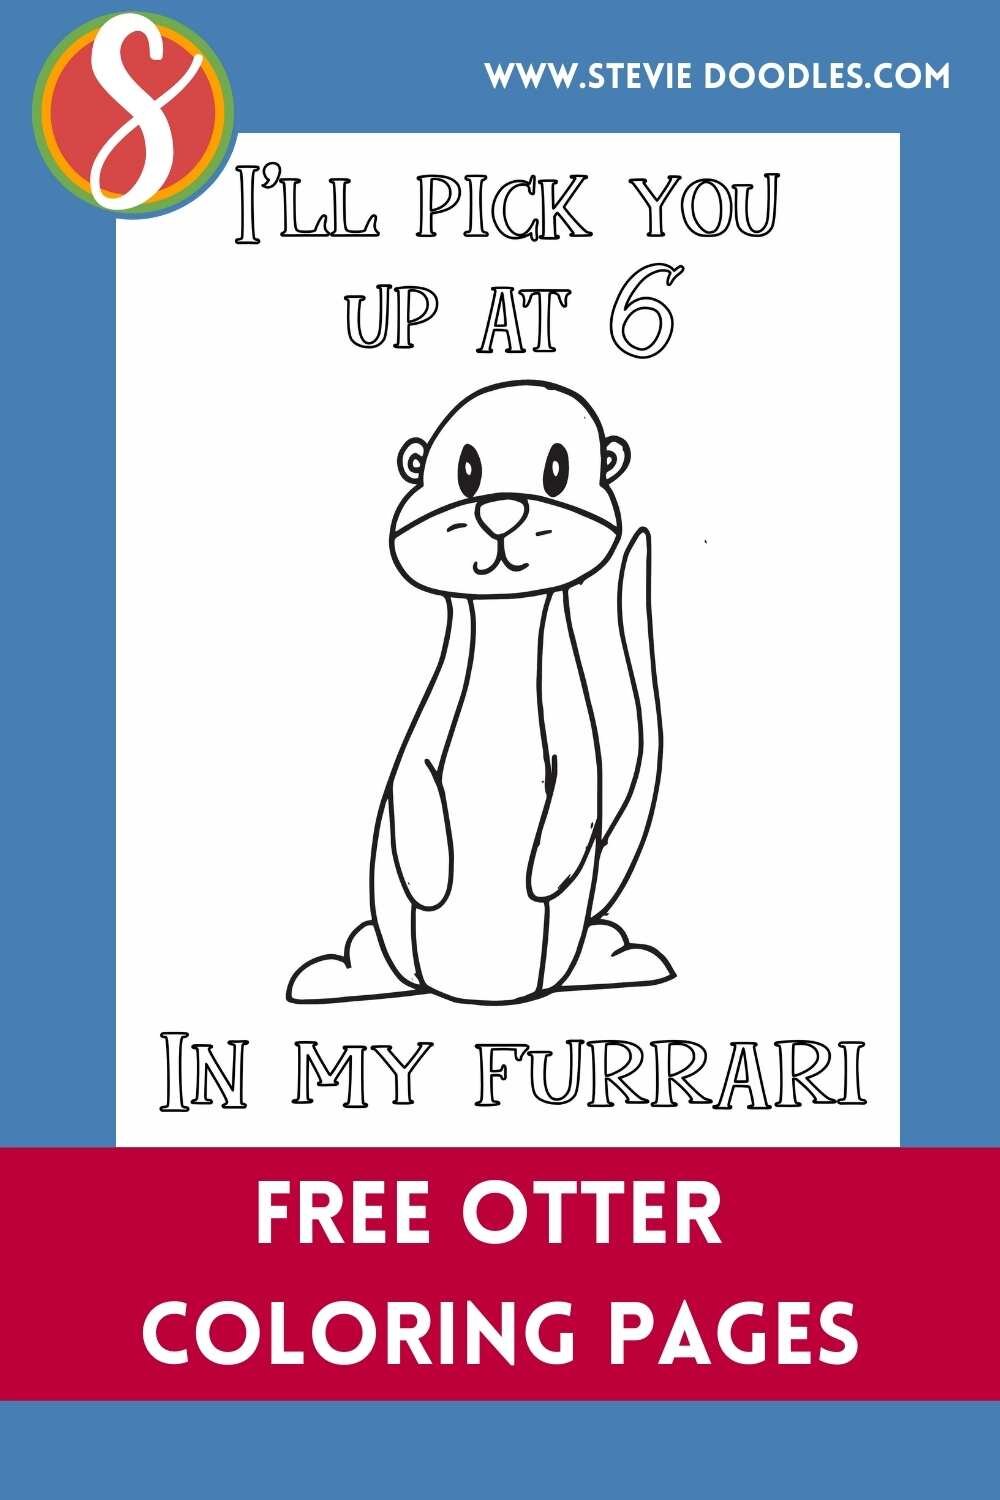 Free otter coloring sheets - 6 free otter pages to print and color